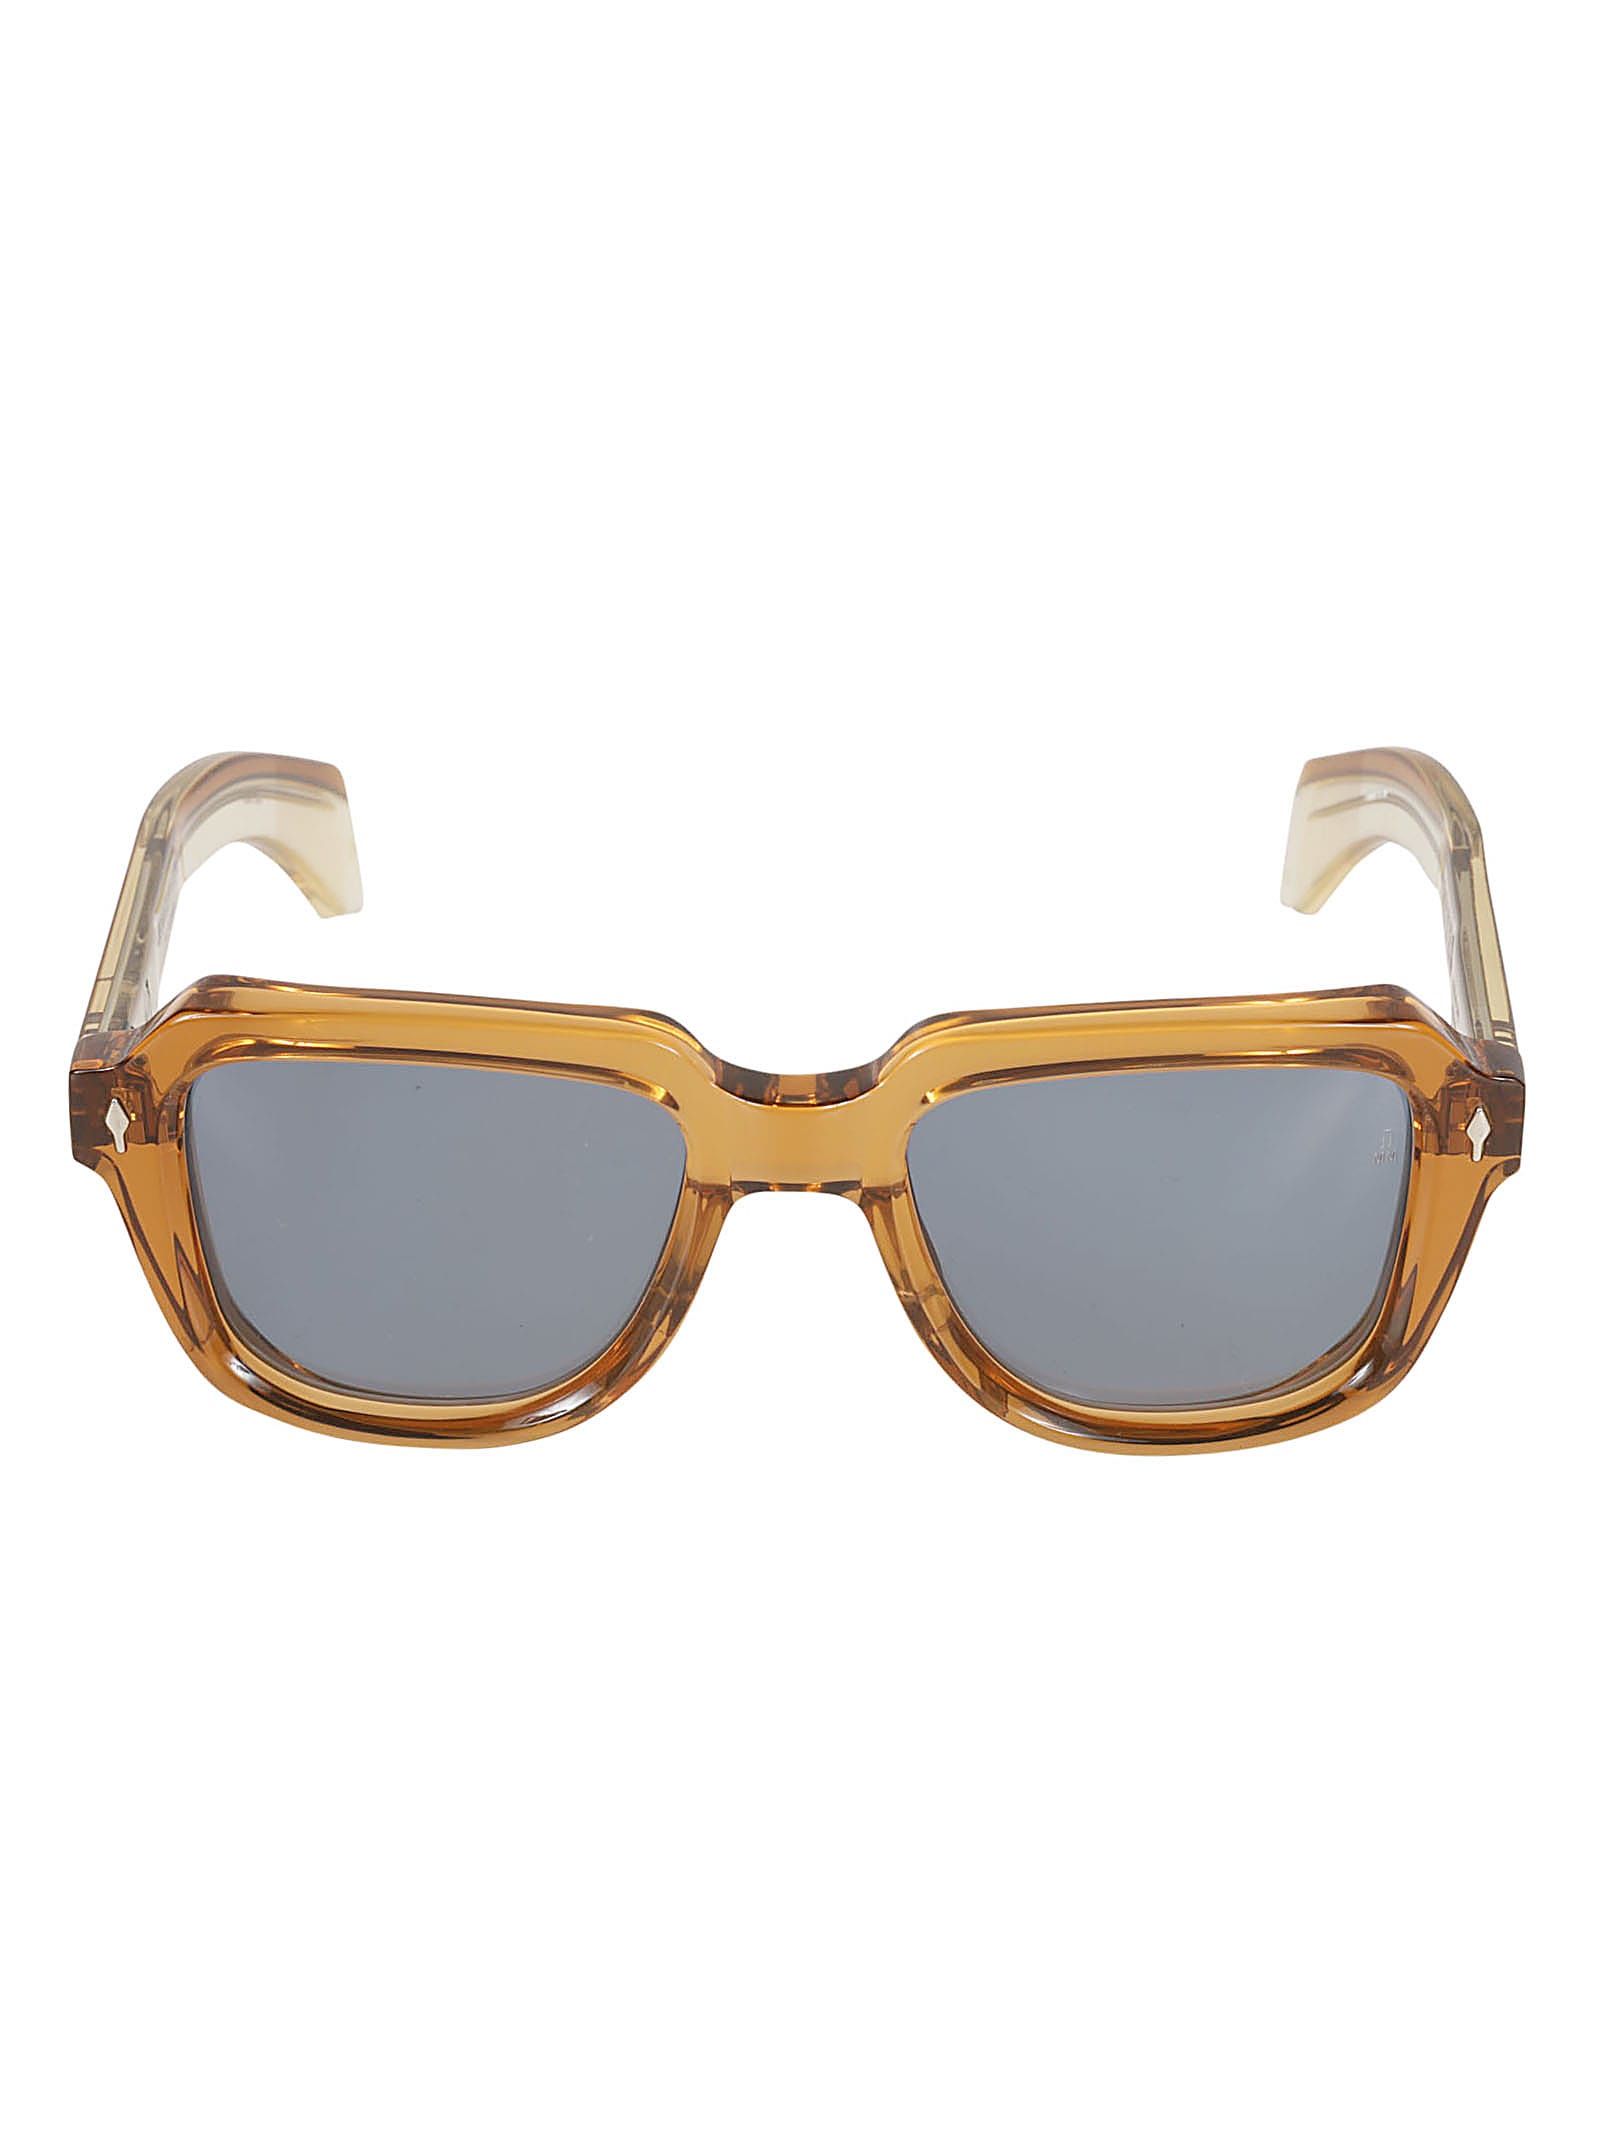 Jacques Marie Mage Taoswhiskey Sunglasses